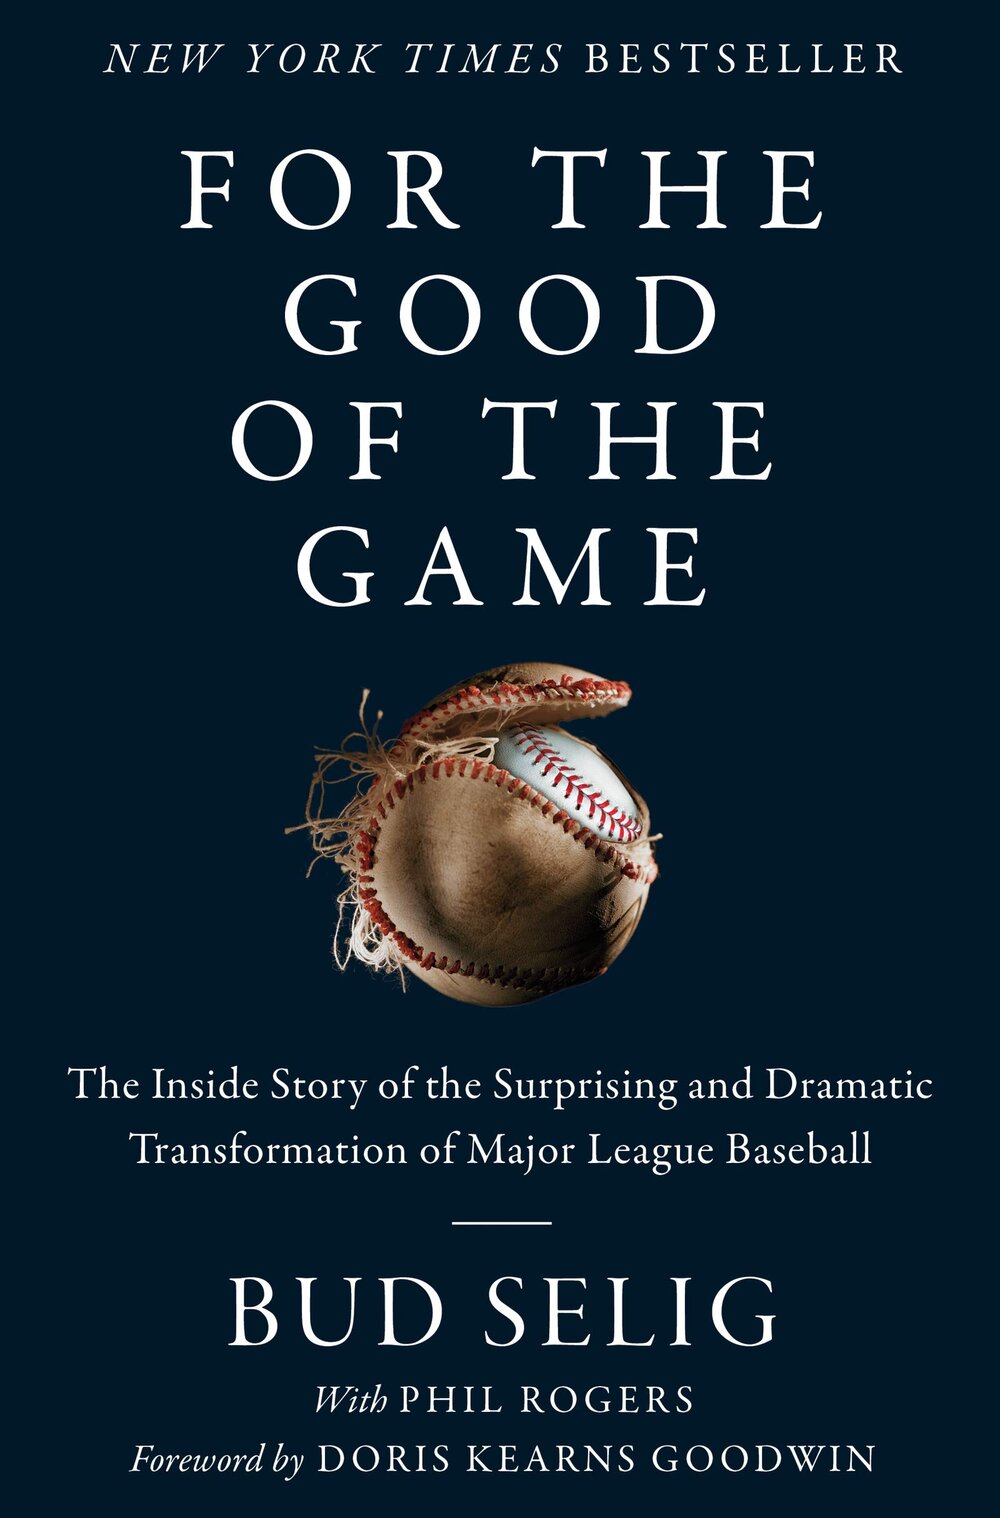 For the Good of the Game by Bud Selig